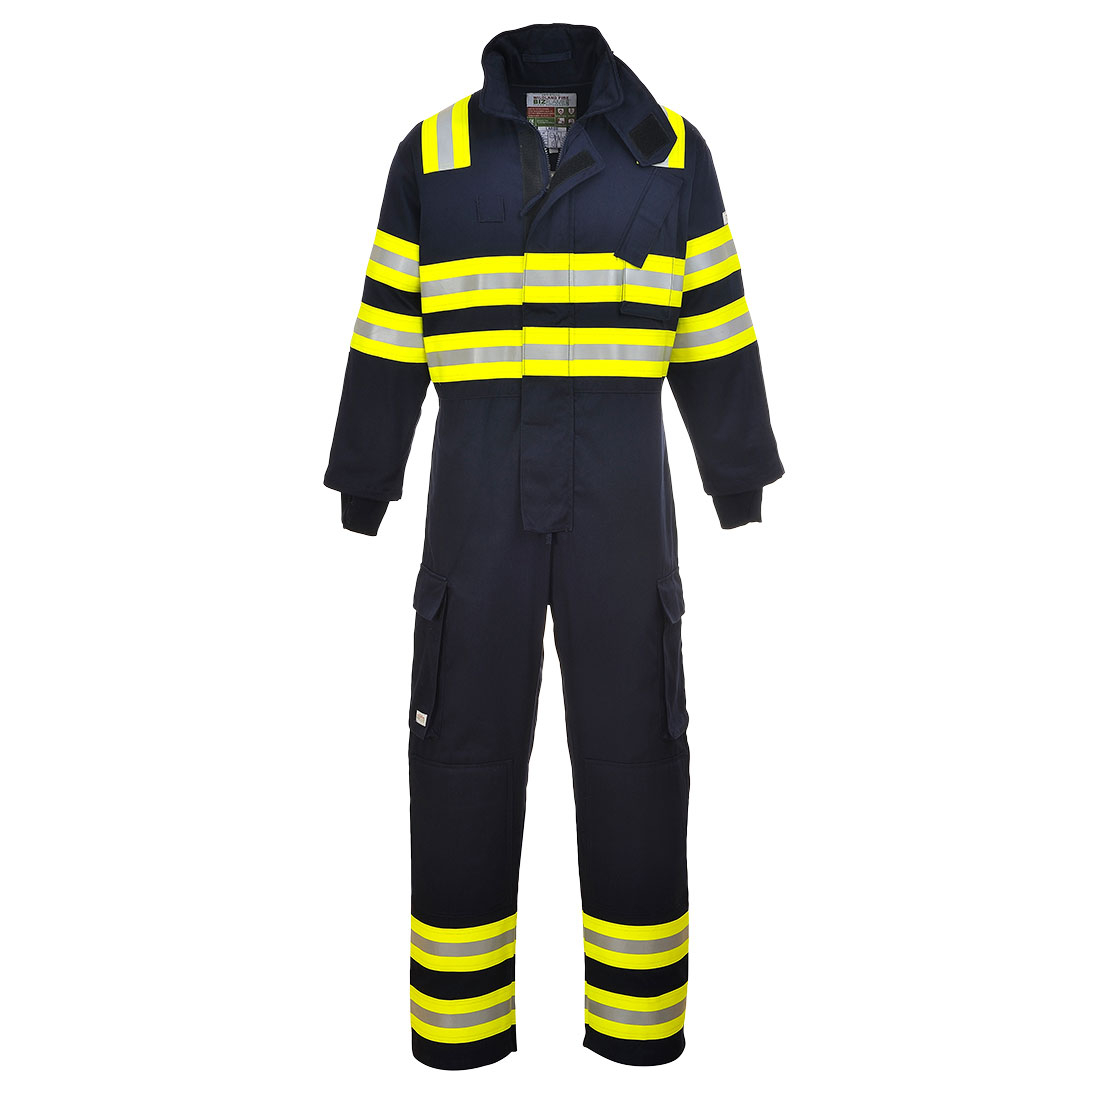 Flame retardant Bizflame overall forest fire FR98 in blue with yellow warning stripes and reflective stripes. Link to article provided.